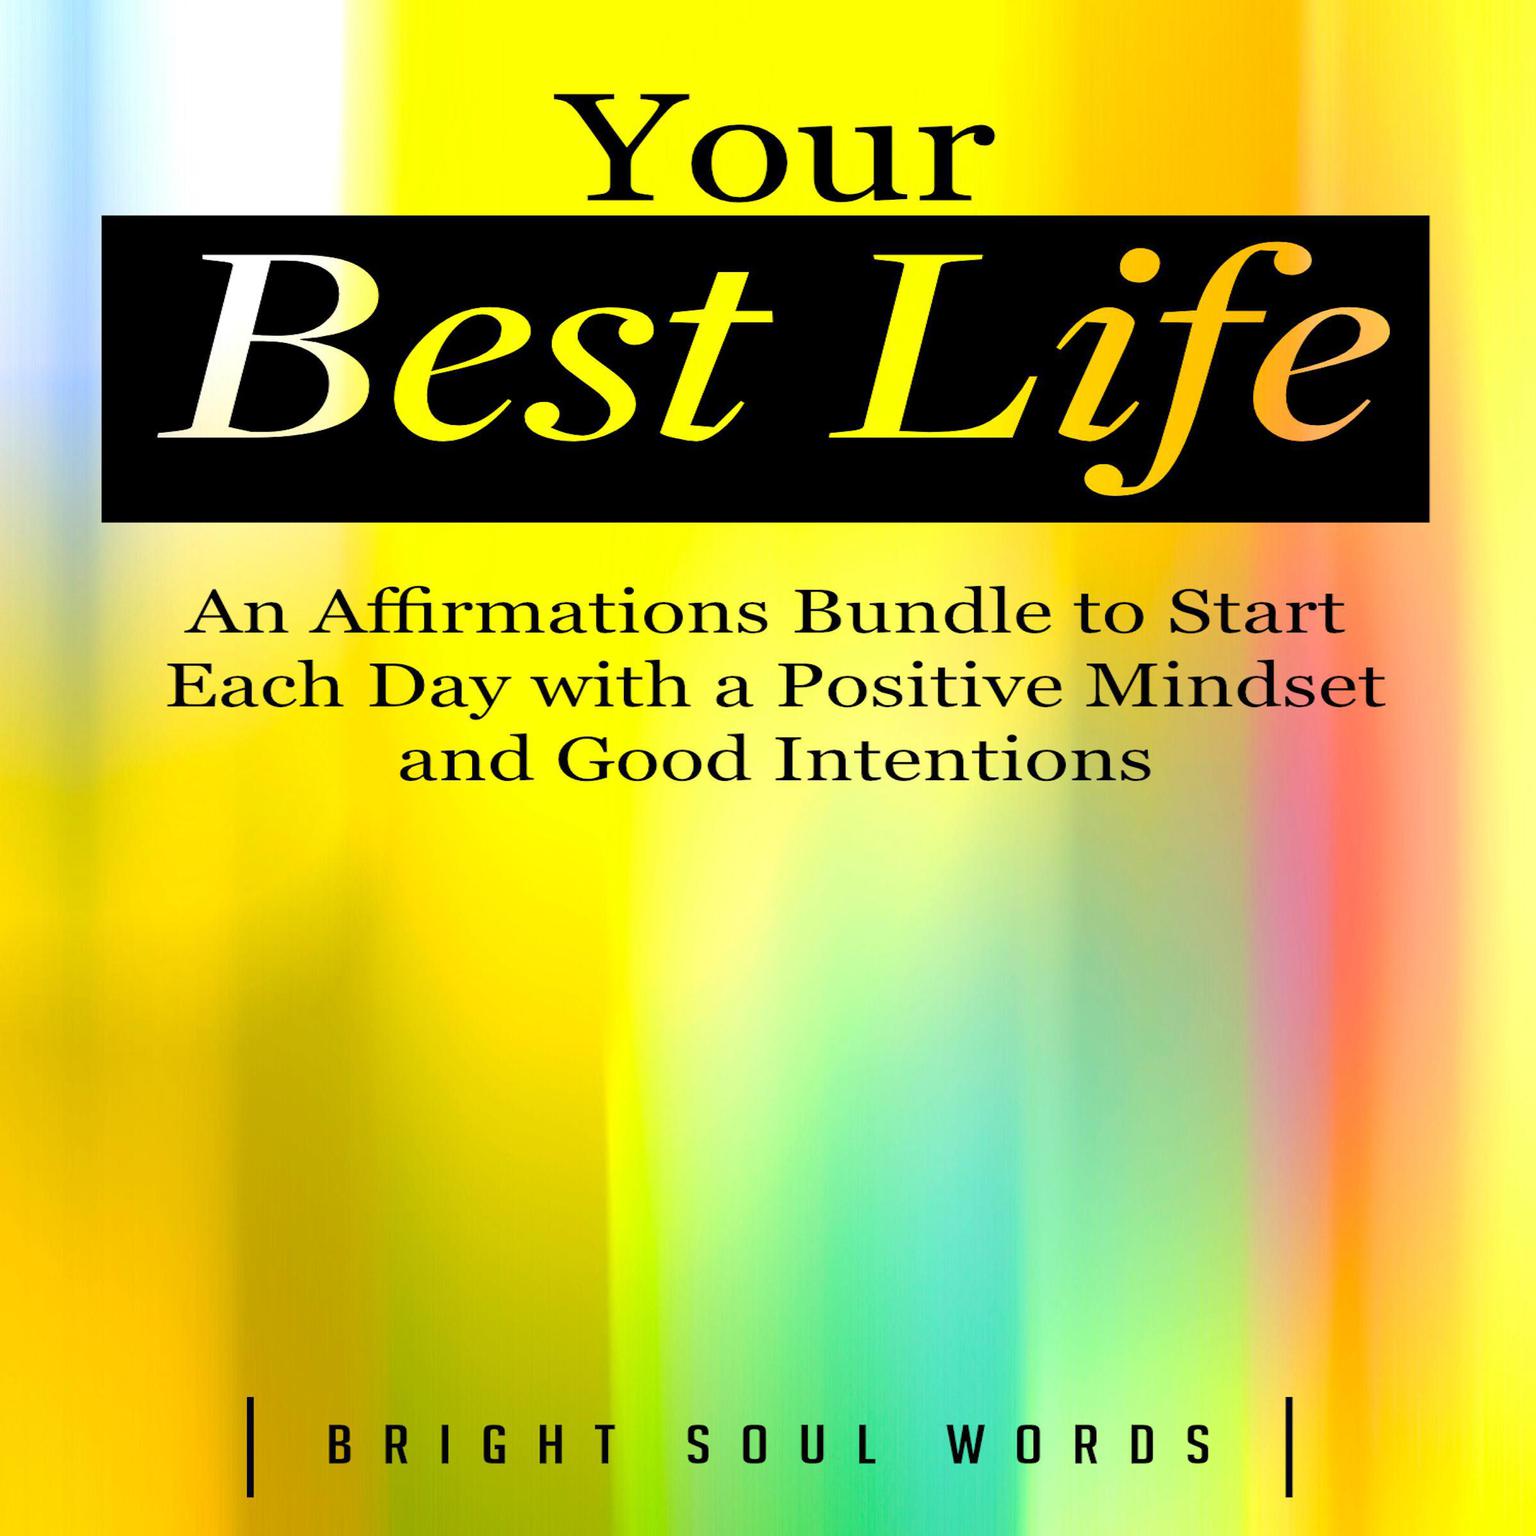 Your Best Life: An Affirmations Bundle to Start Each Day with a Positive Mindset and Good Intentions Audiobook, by Bright Soul Words